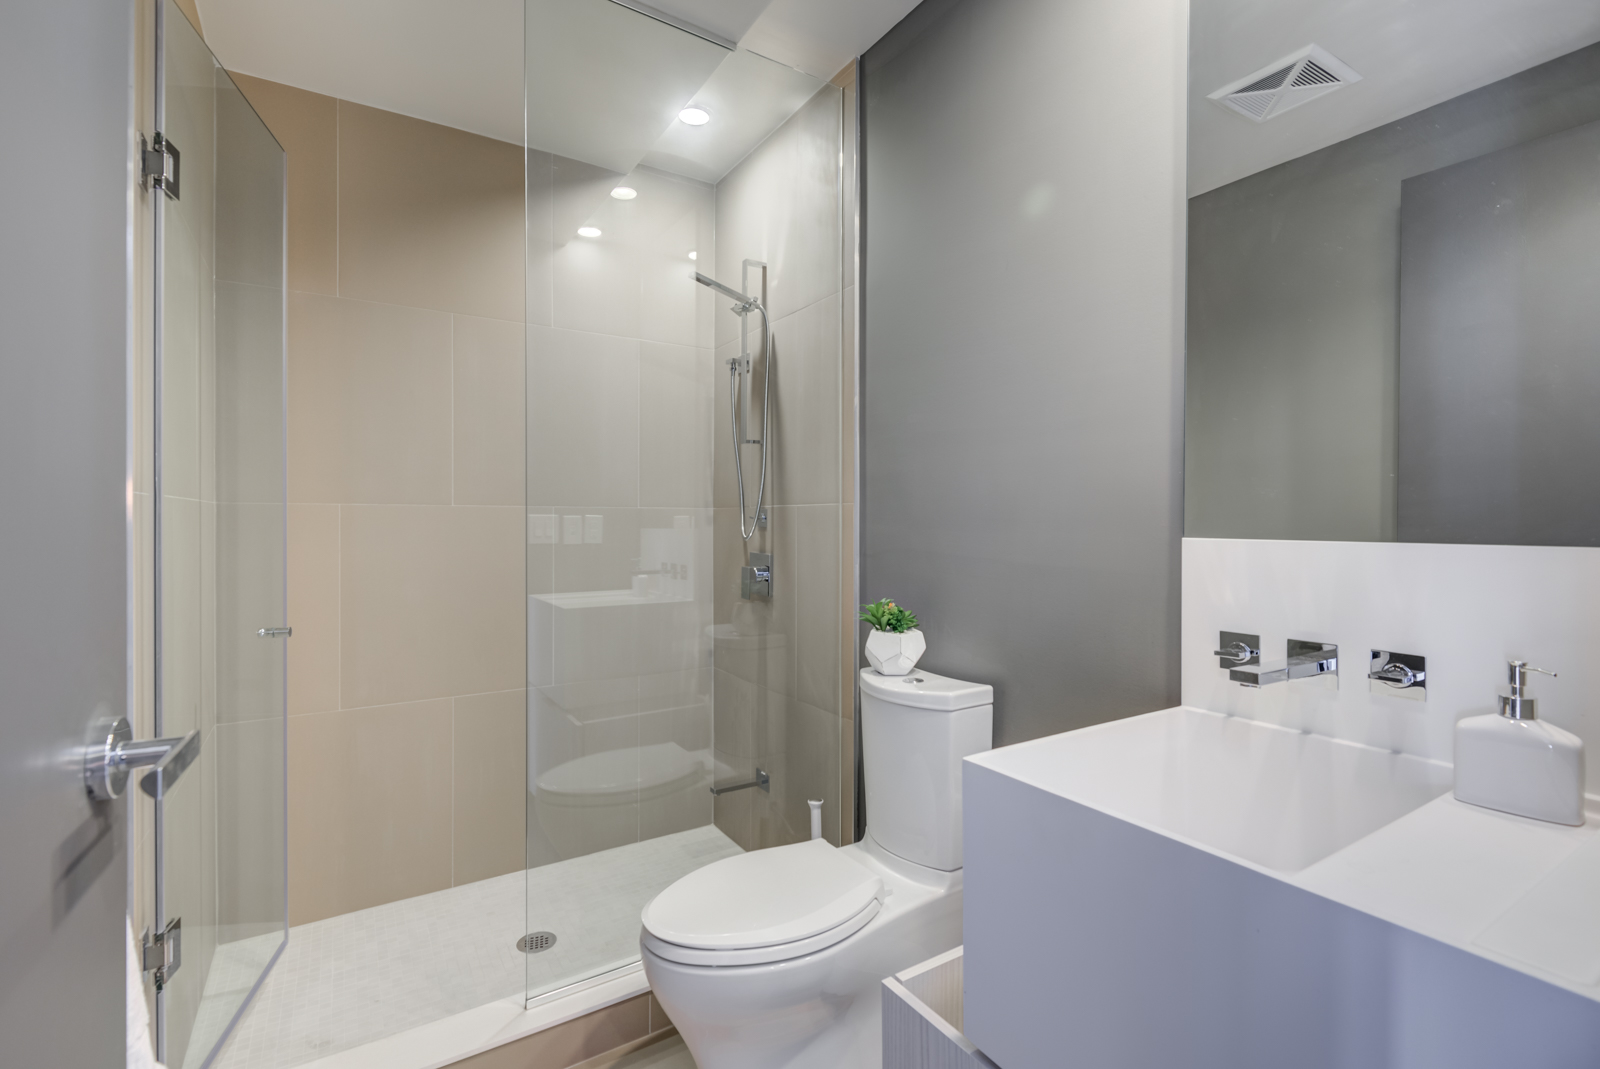 1 Bloor St E Unit 4305 bathroom with walk-in shower, large white sink, cabinets and wall-mounted faucet.